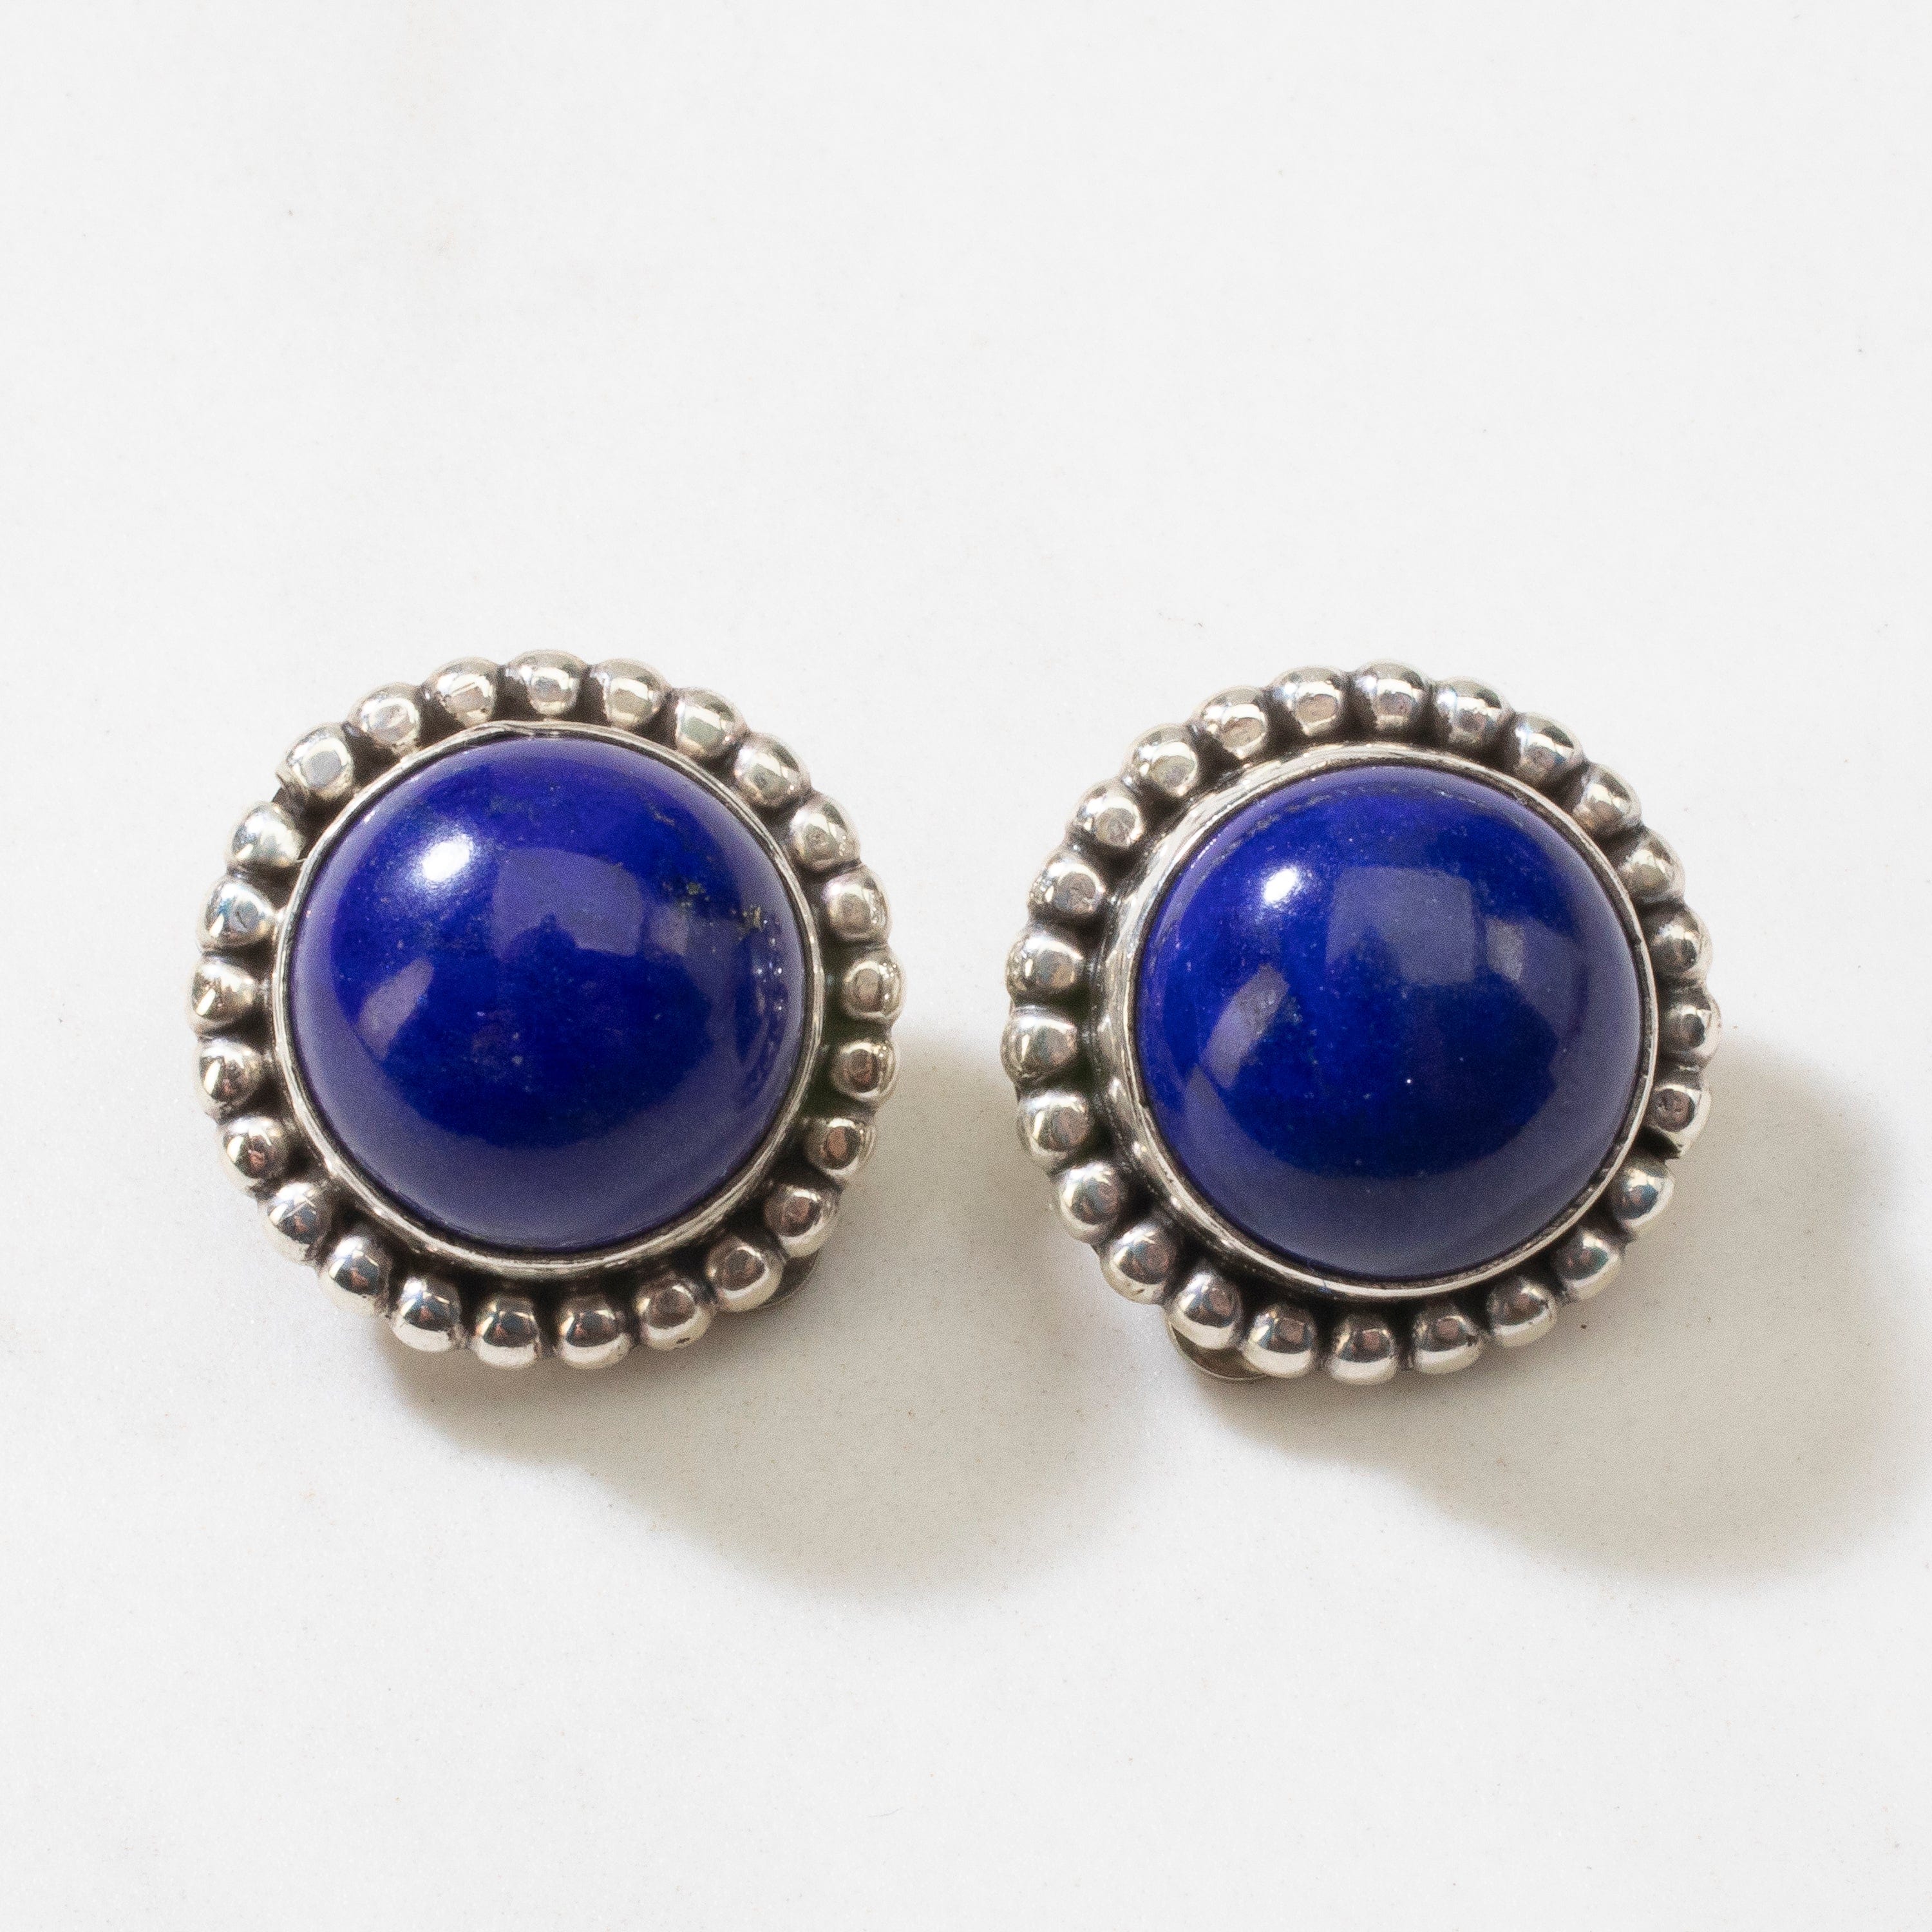 Kalifano Native American Jewelry Lapis Round Navajo USA Native American Made 925 Sterling Silver Earrings with Clip On Backing NAE300.032